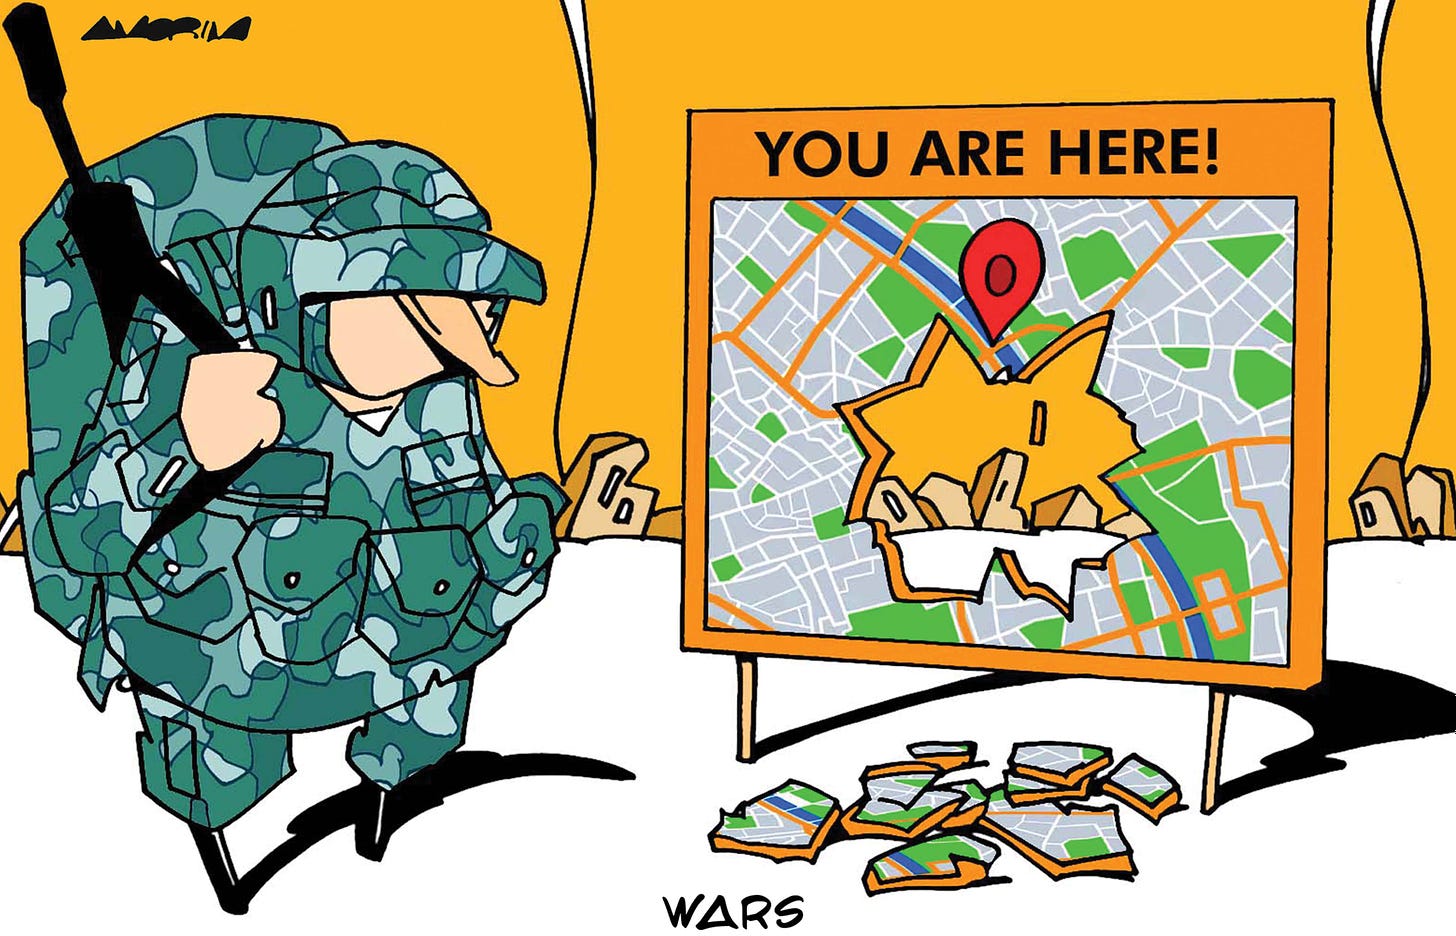 Cartoon showing a soldier standing in of a public map. The little red arrow indicating 'You are here' indicates a big hole in the map. Through the hole, we see a city that is destroyed. The caption below the cartoon reads 'Wars'. 